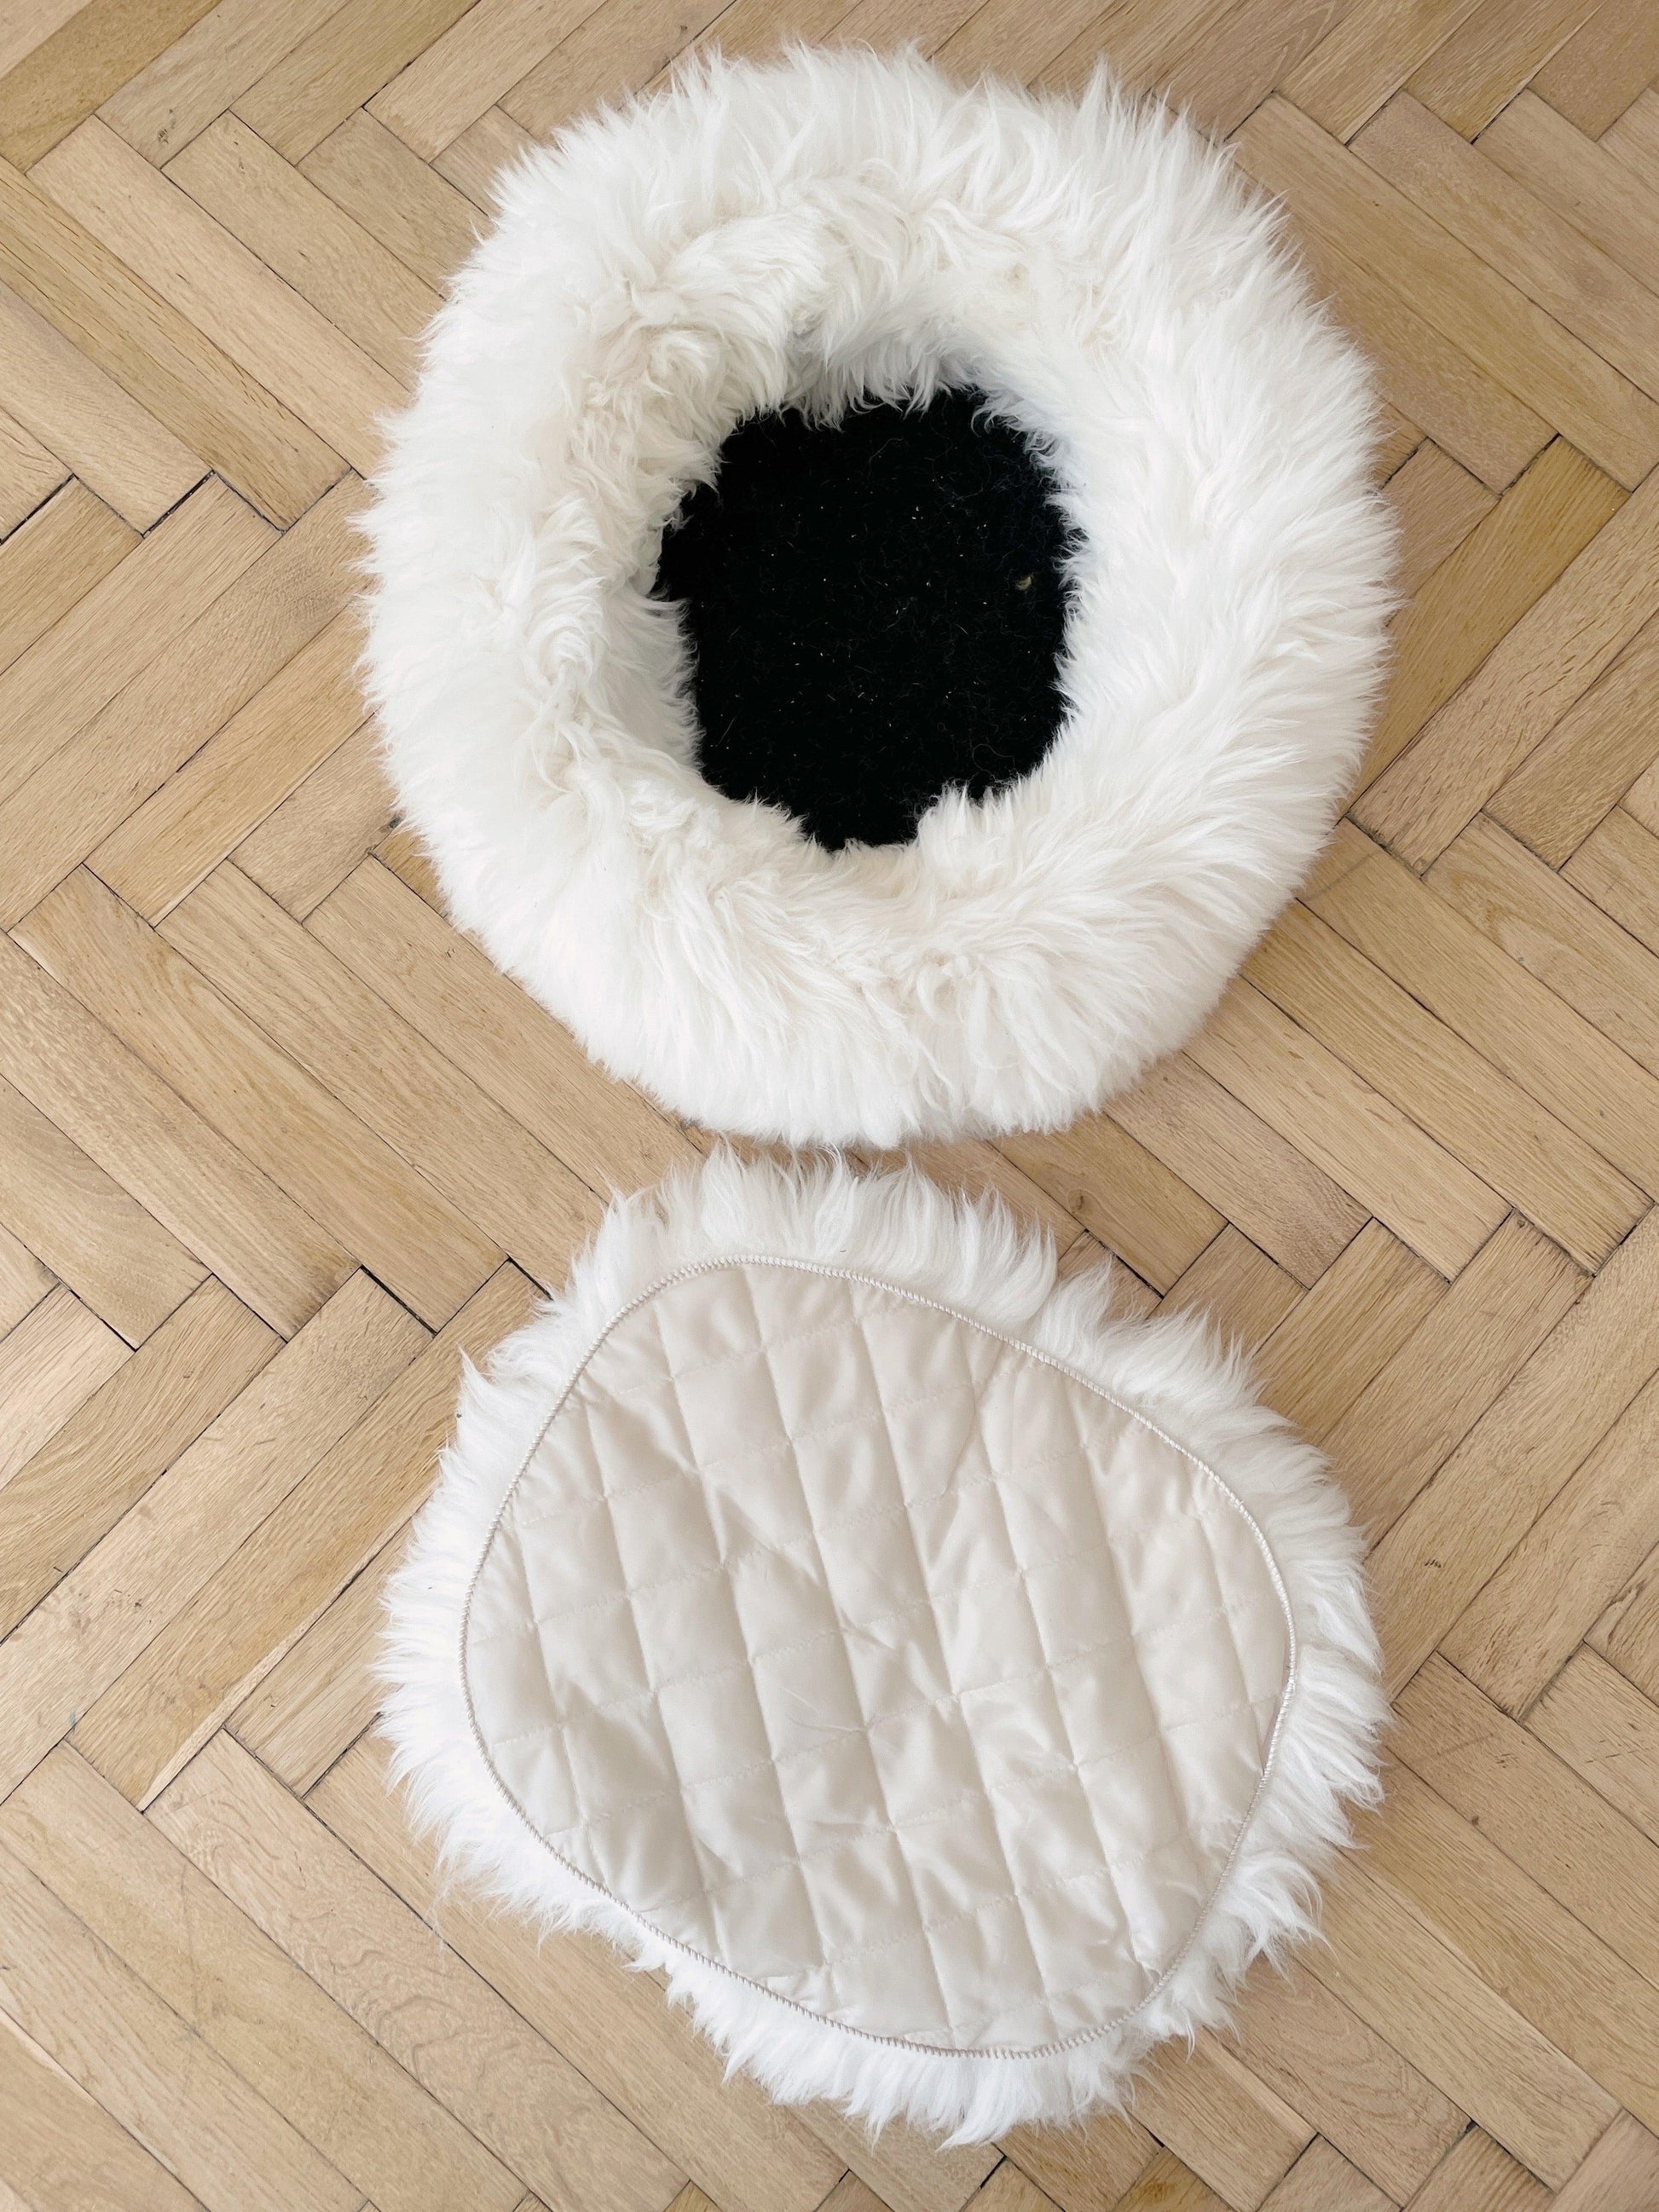 A white and black Round Natural Sheepskin Pet Bed from Mellow Pet Store on a wooden floor.